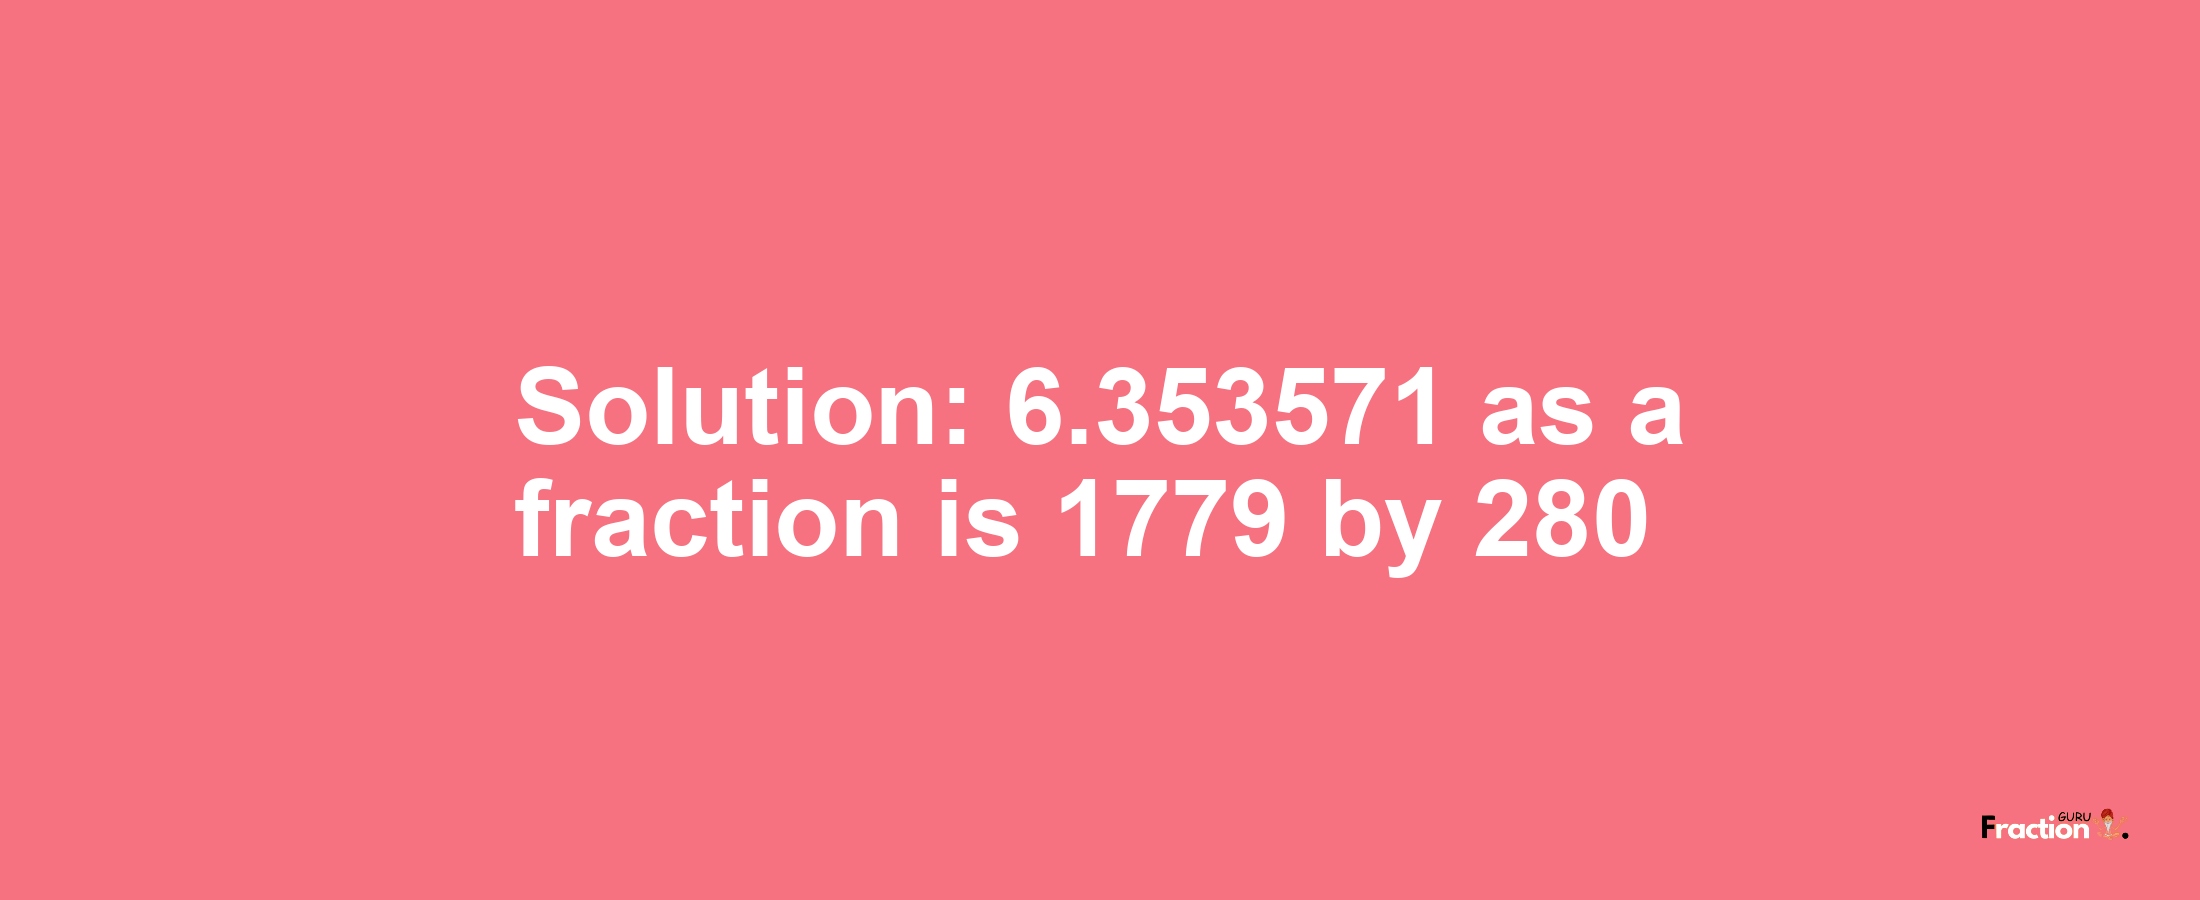 Solution:6.353571 as a fraction is 1779/280